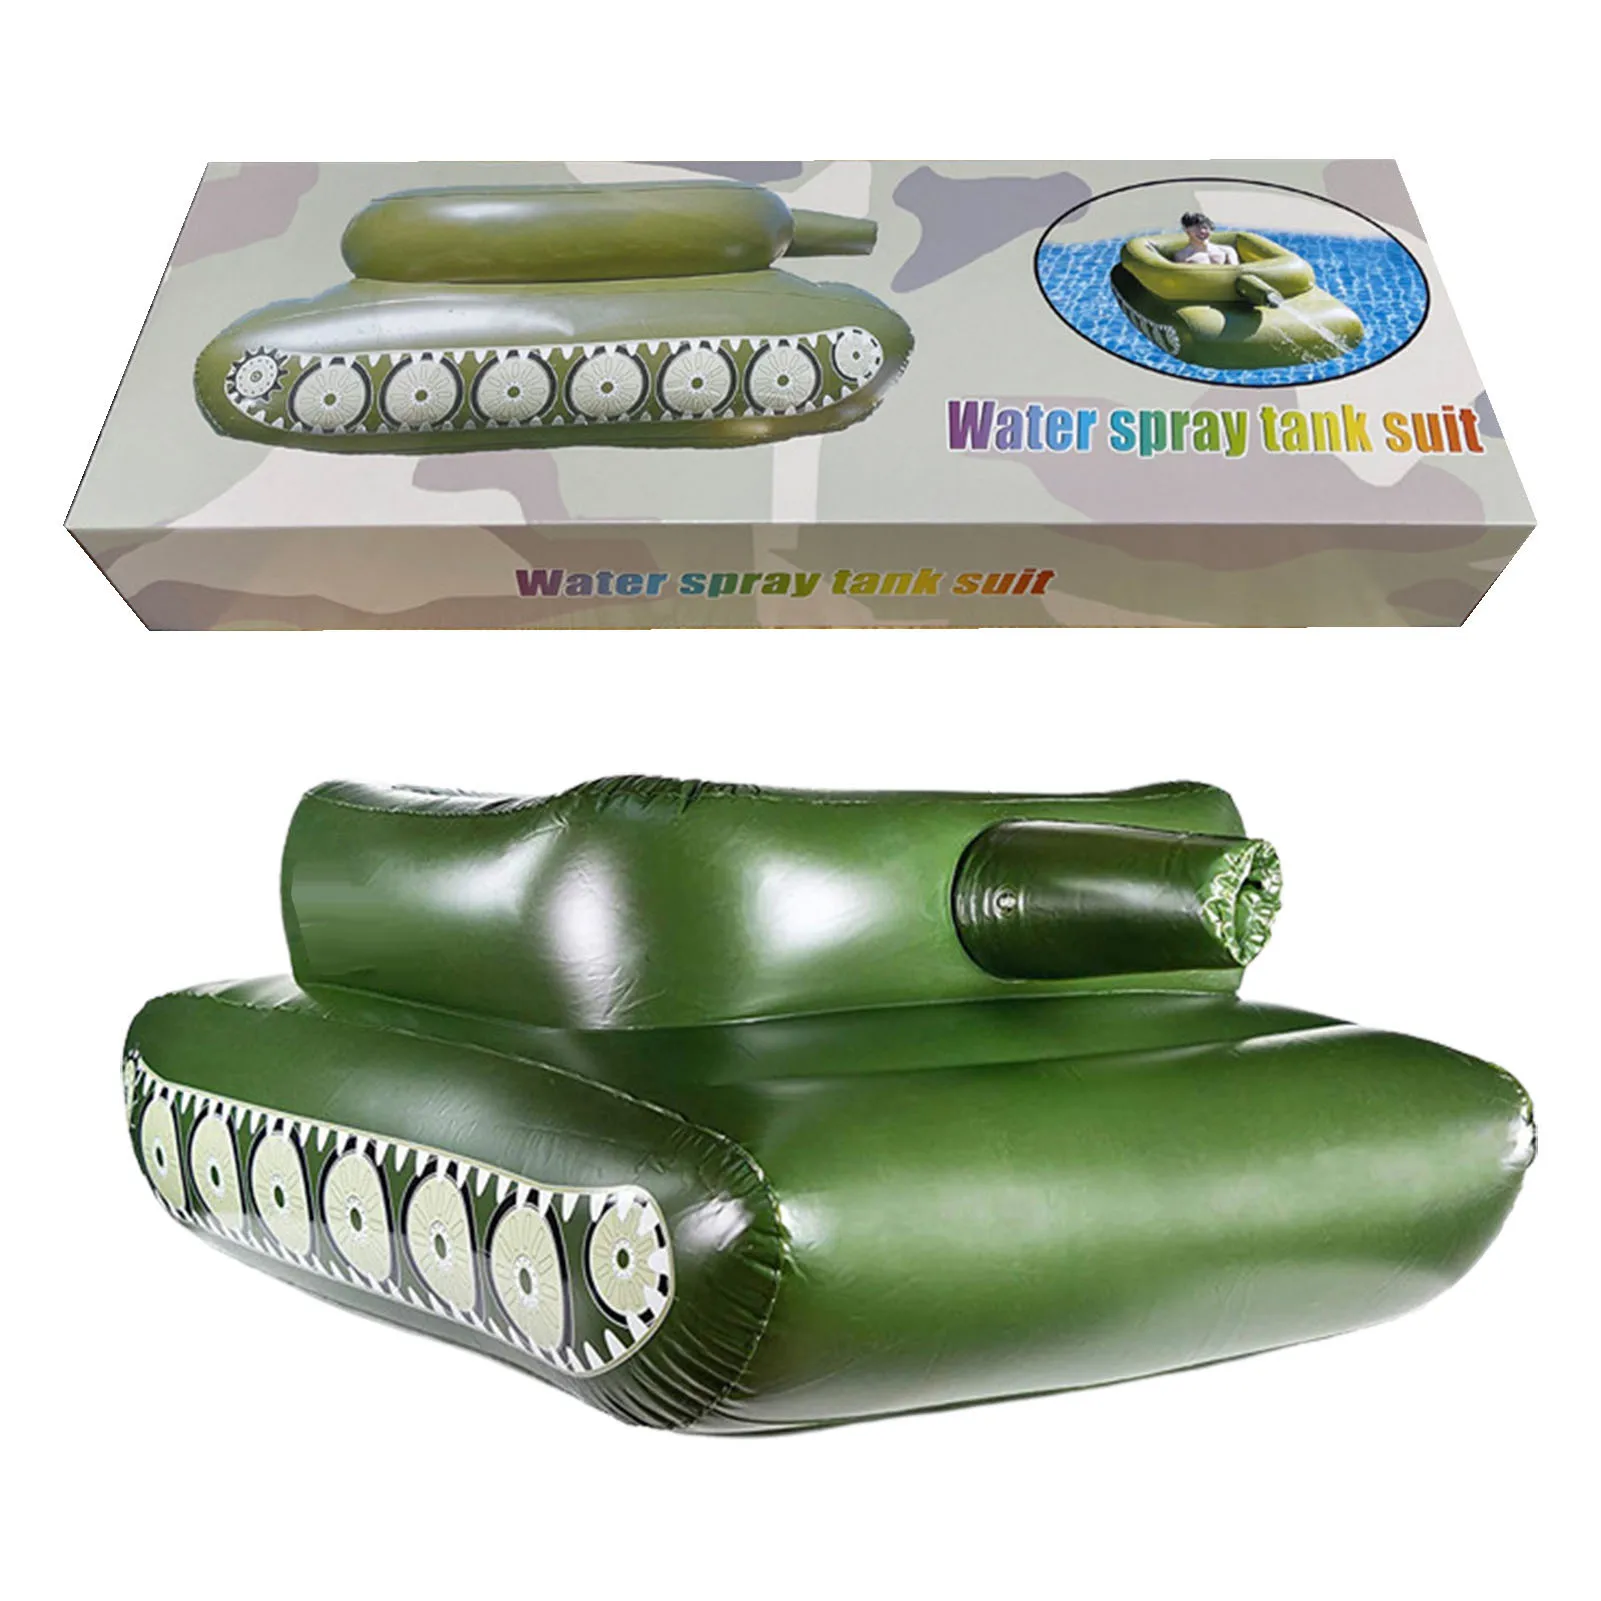 New Inflatable Tank Pool Float Pool Float Tank Float with Water Squirt Cannon Inflatable Tank Pool Float Pool Toys Swimming Pool